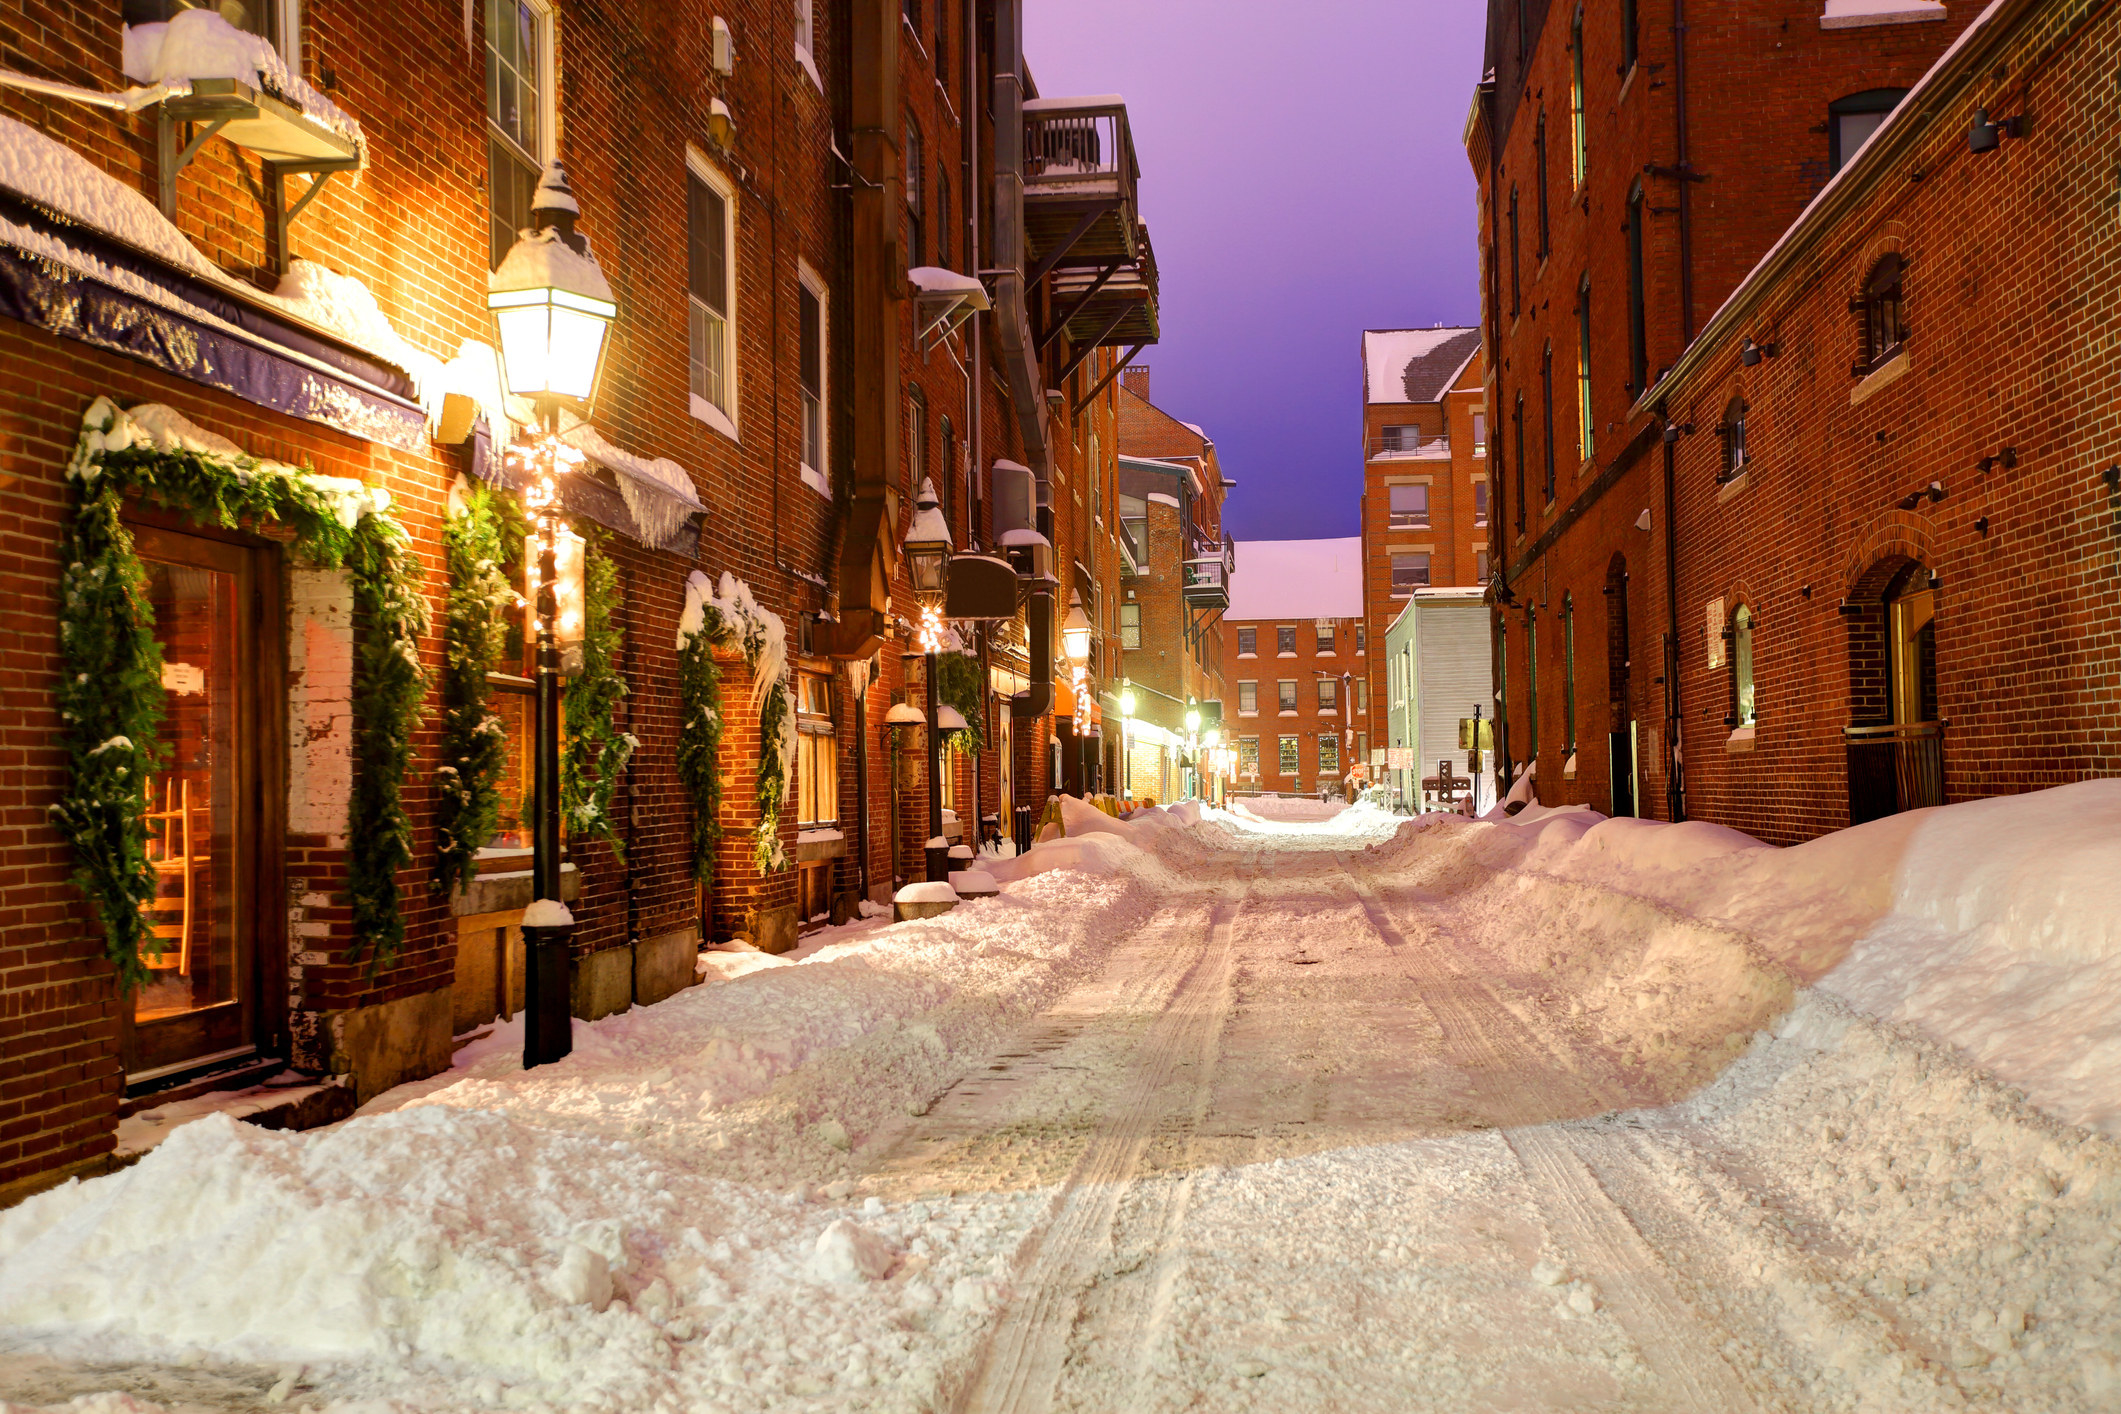 A New England street covered in snow.